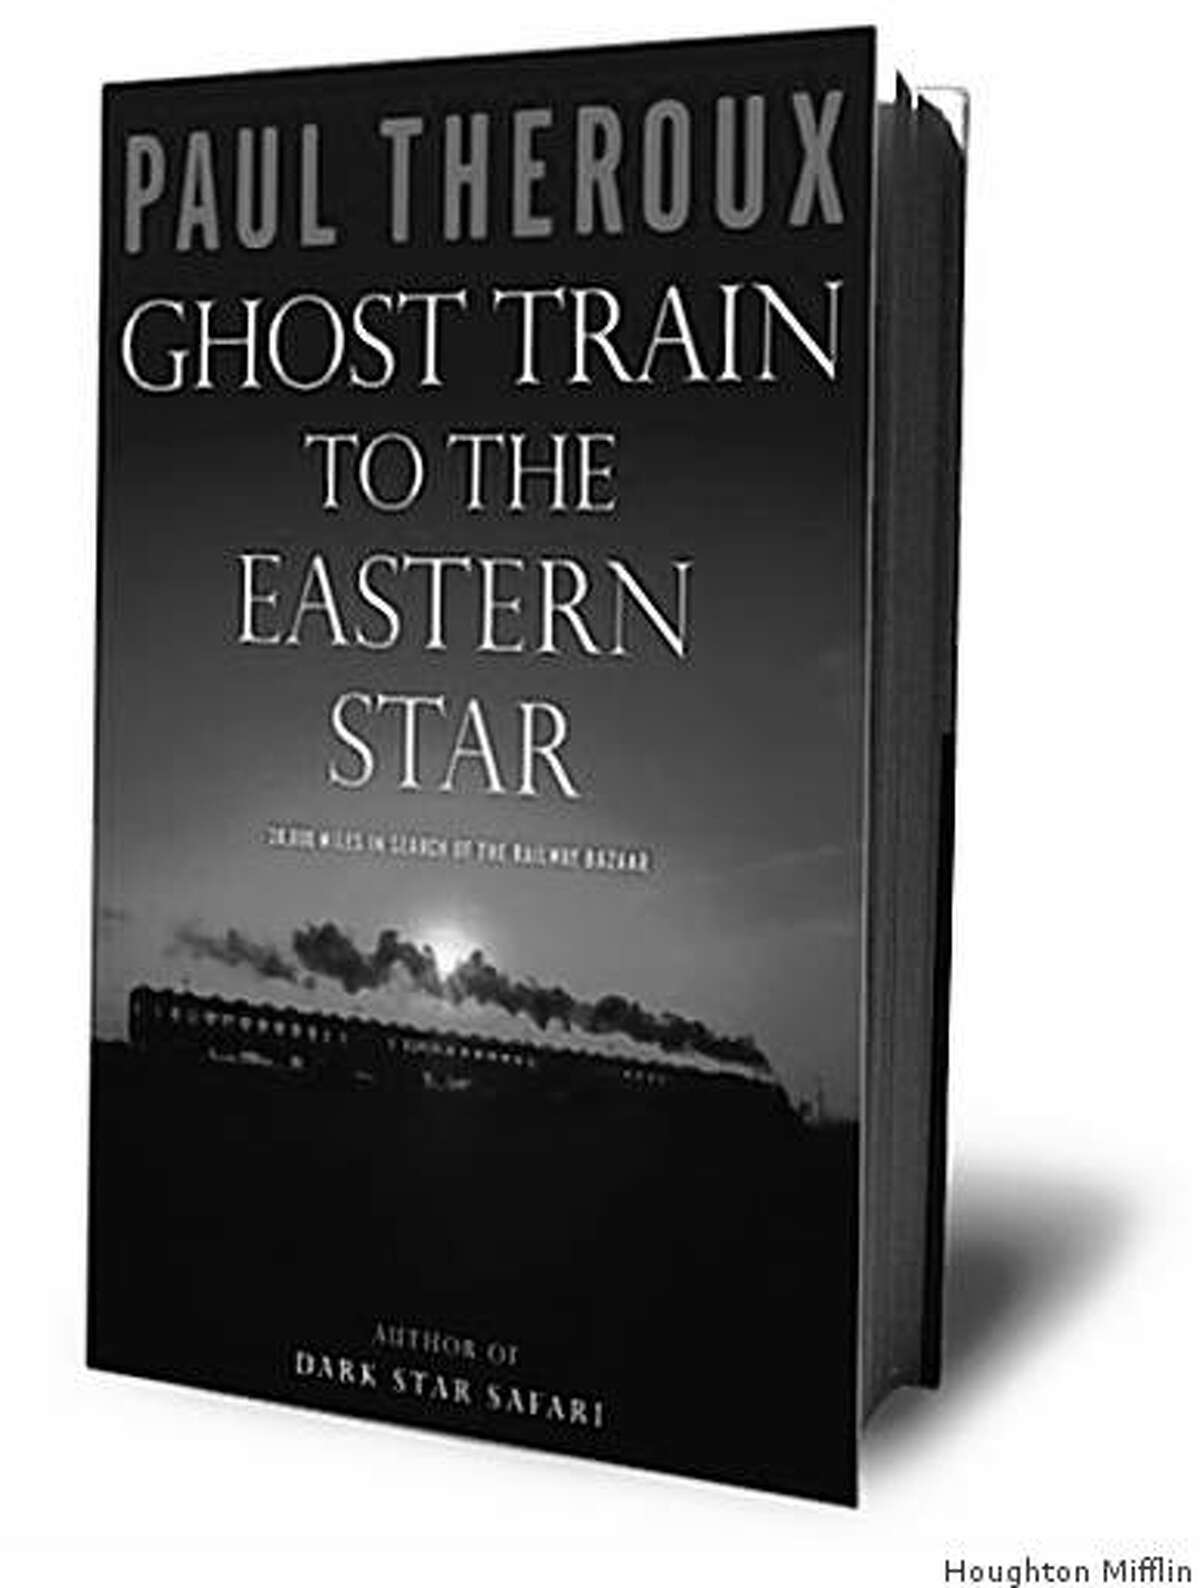 Cover of Paul Theroux's book, "Ghost Train to the Eastern Star", published by Houghton Mifflin.